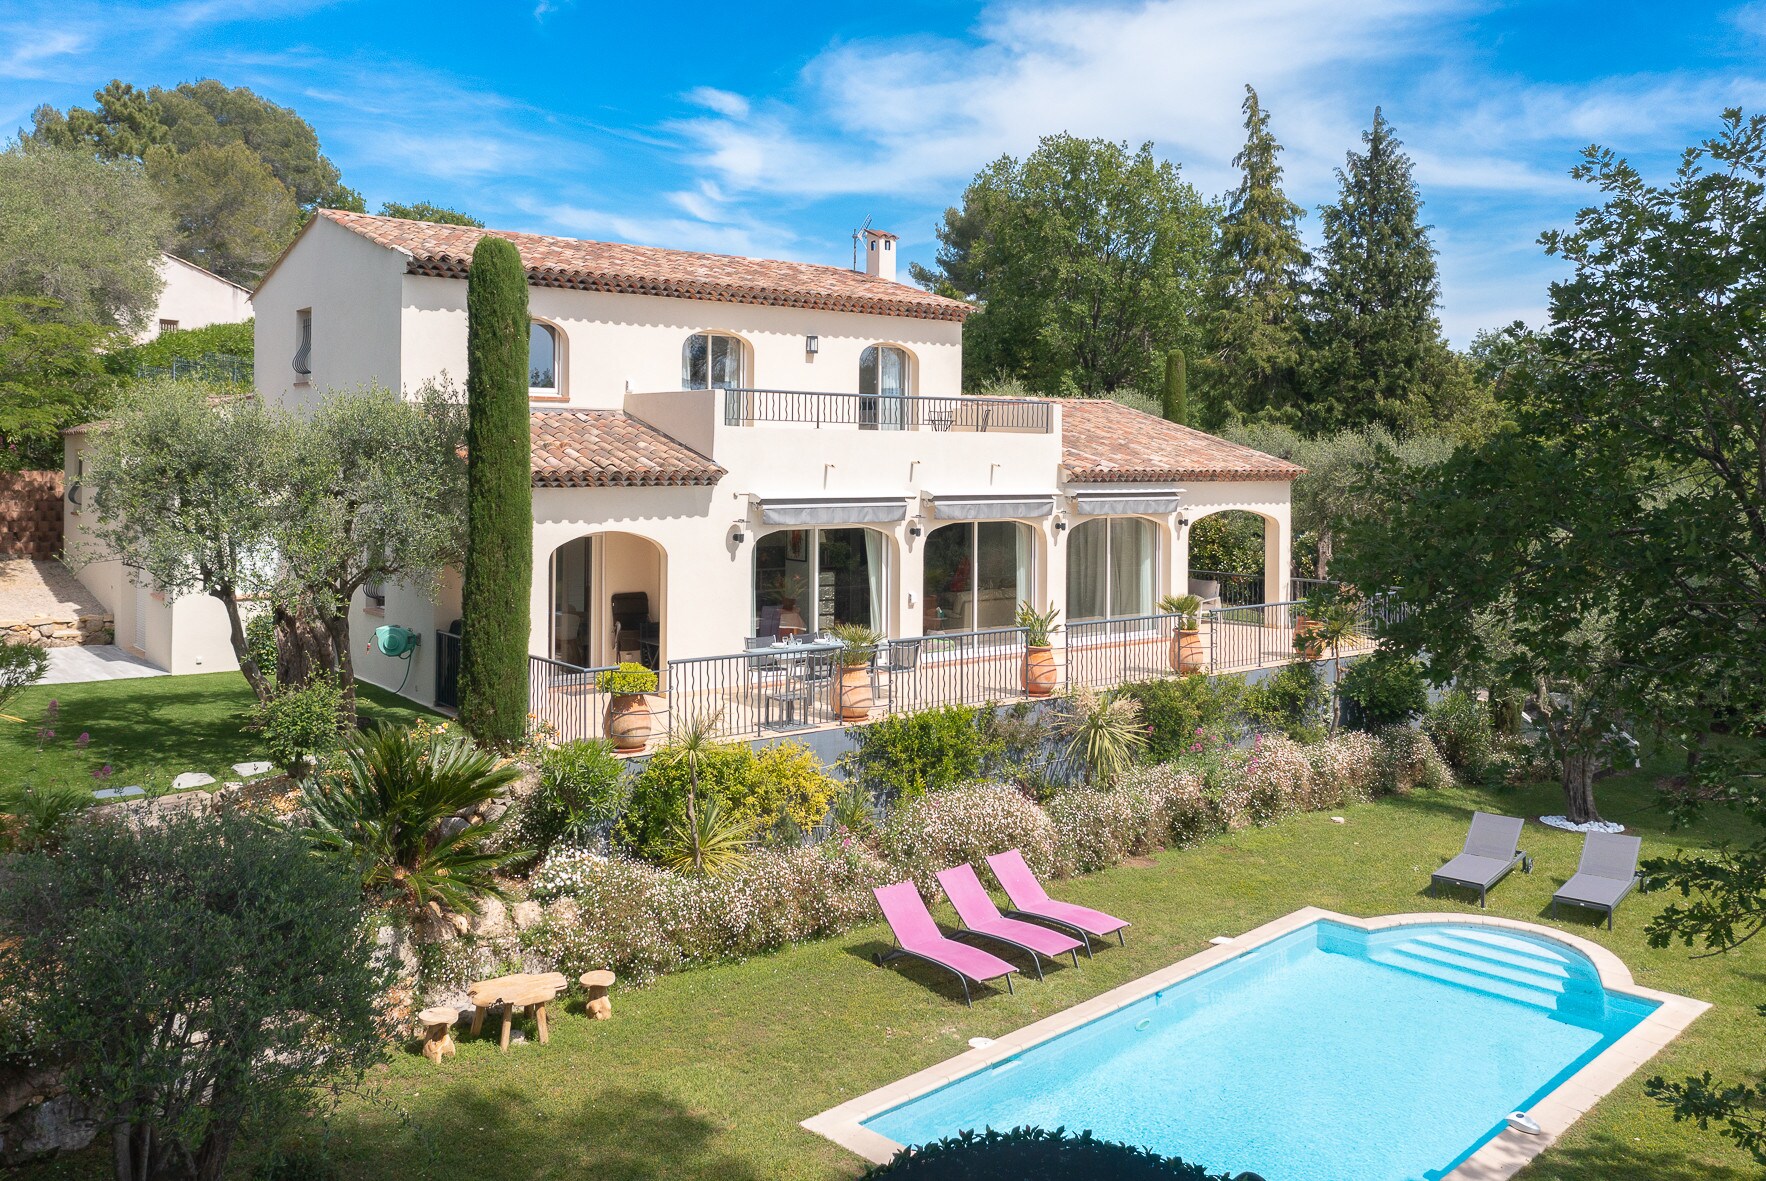 Property Image 1 - Pretty 3 bedroom family villa with heated pool and great mountain views near Valbonne village